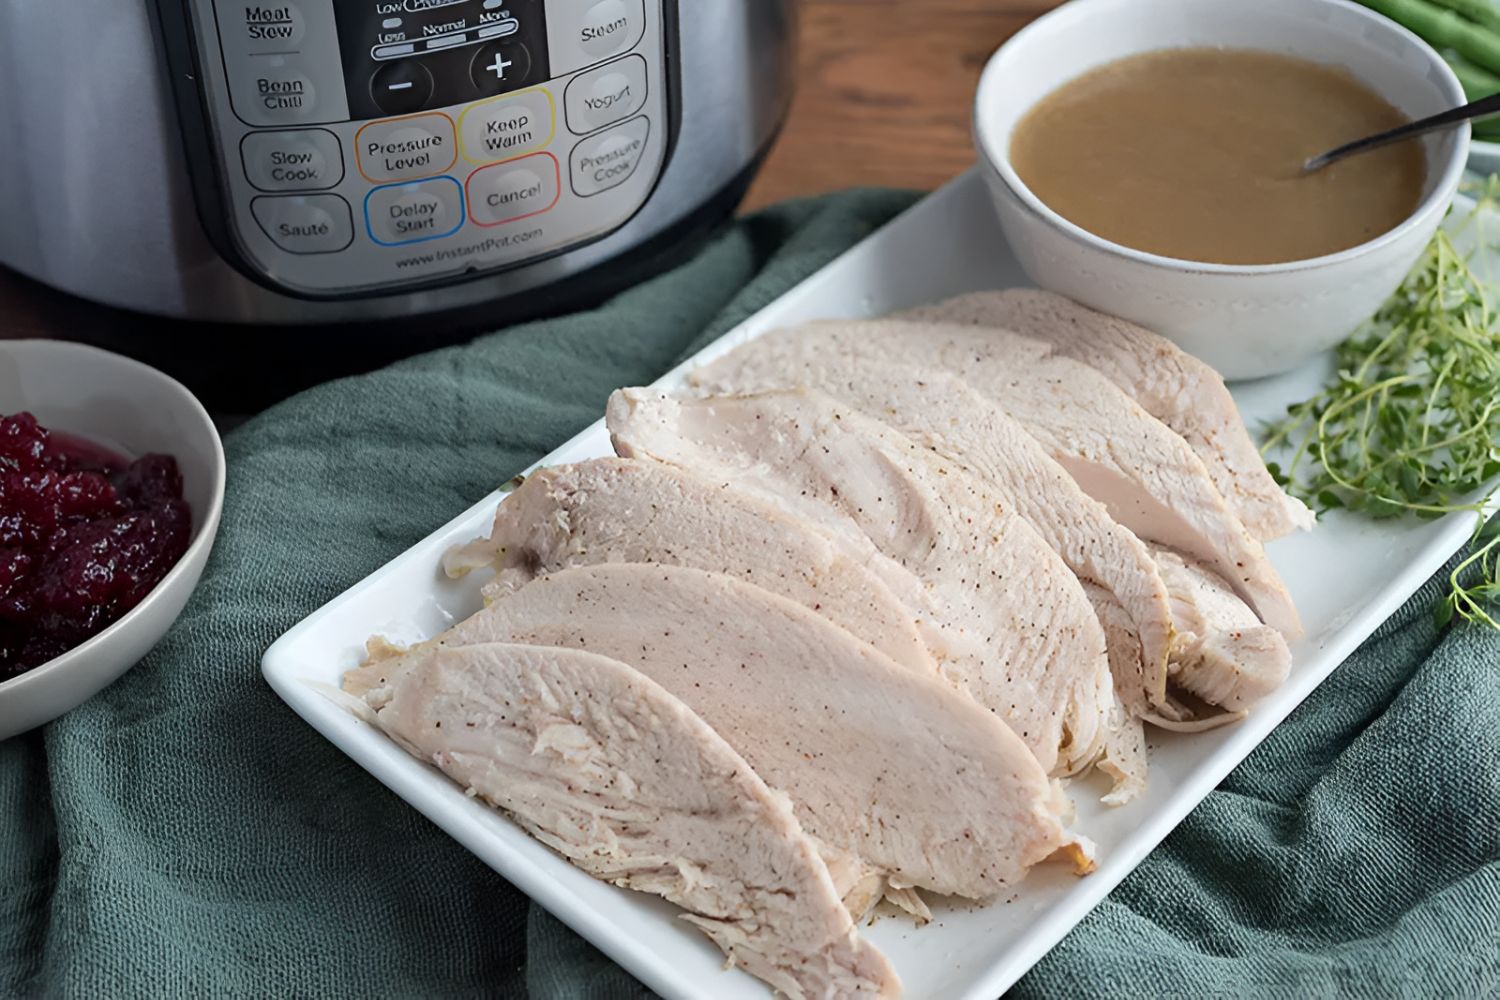 How To Cook A Frozen Turkey Breast In An Electric Pressure Cooker